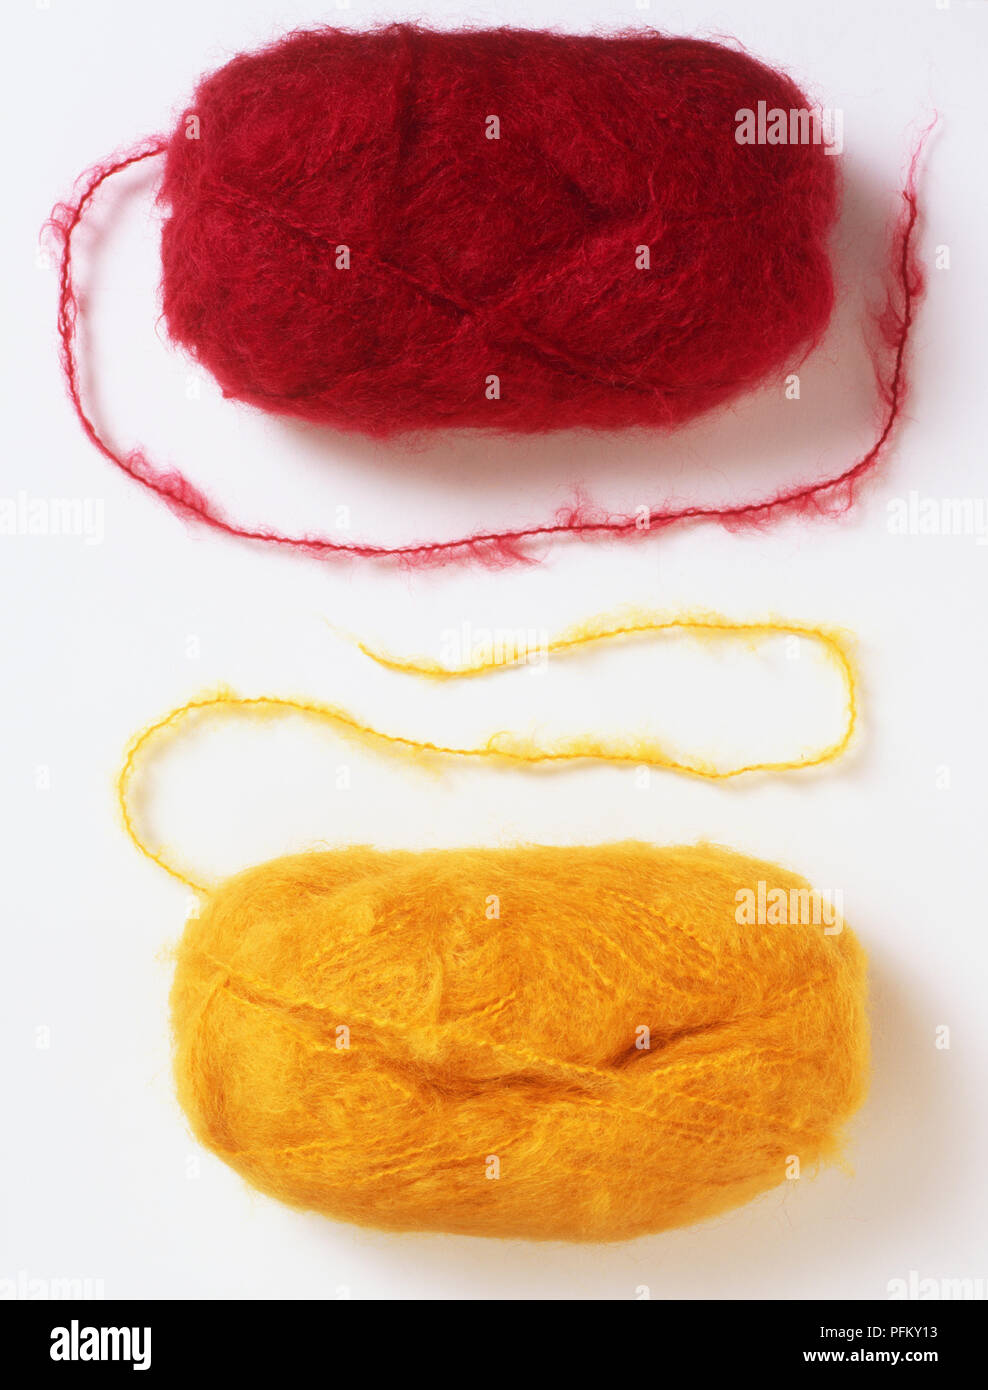 Yellow and red balls of mohair yarn Stock Photo